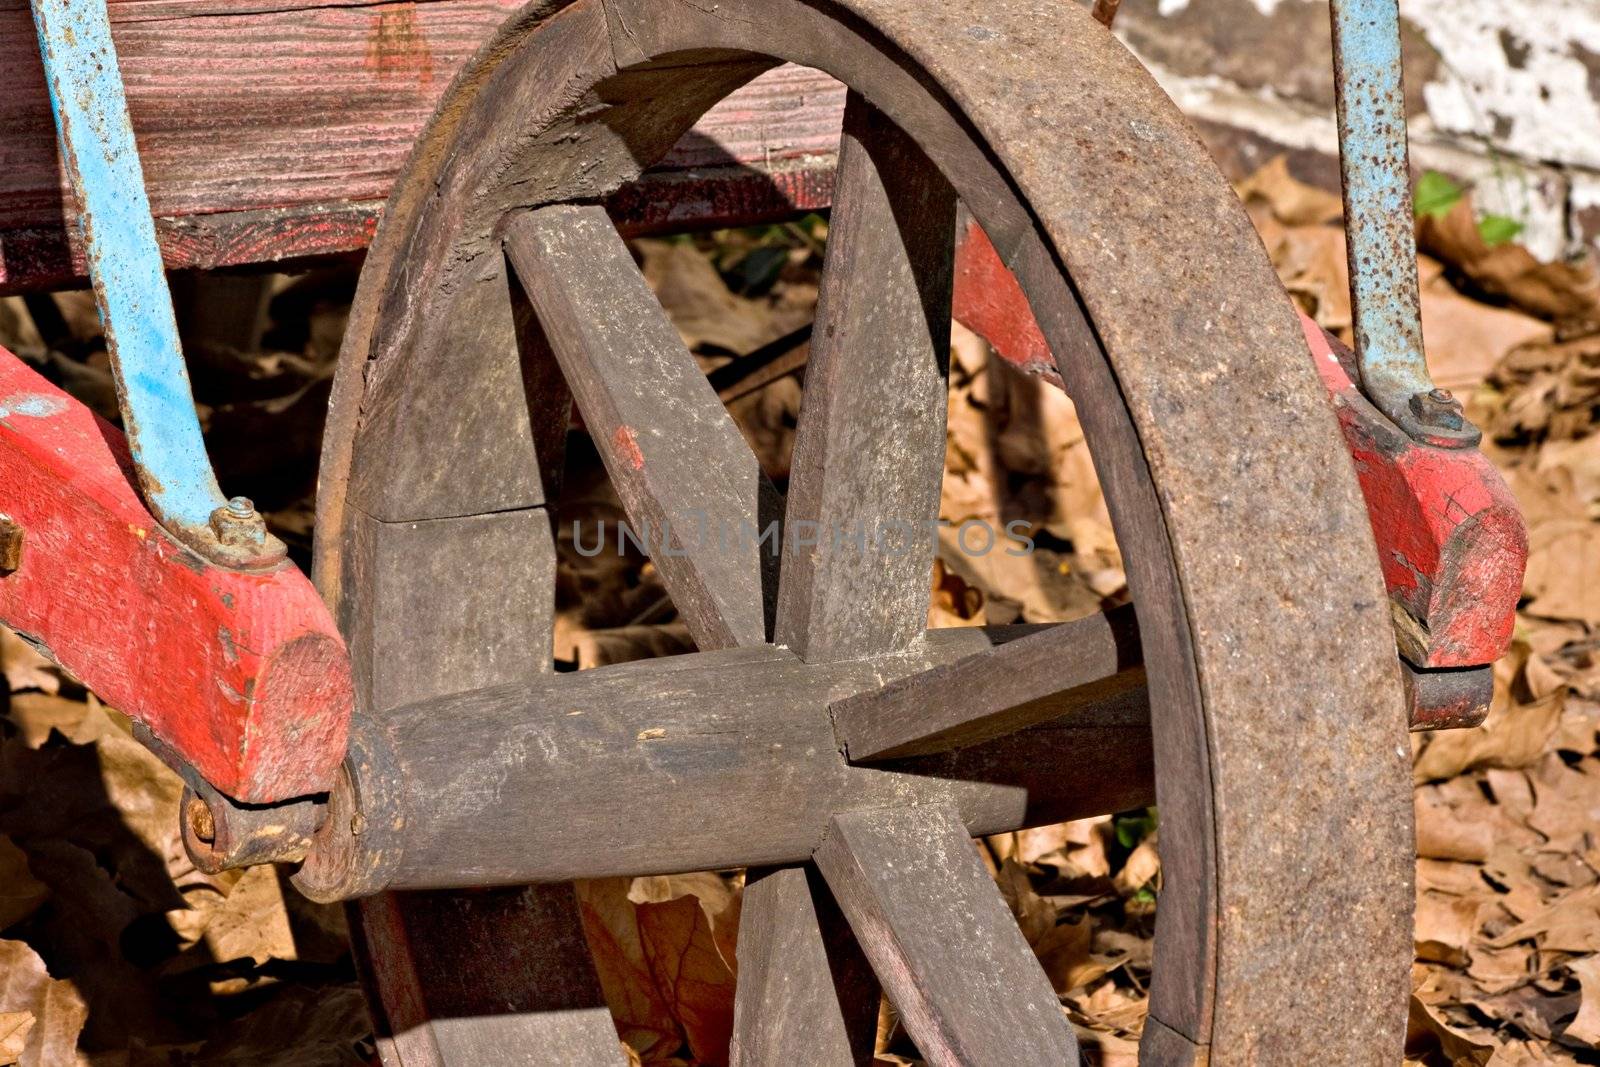 A closeup of an old wheelbarrow wheel in Allaire Village, New Jersey. Allaire village was a bog iron industry town in New Jersey during the early 19th century.